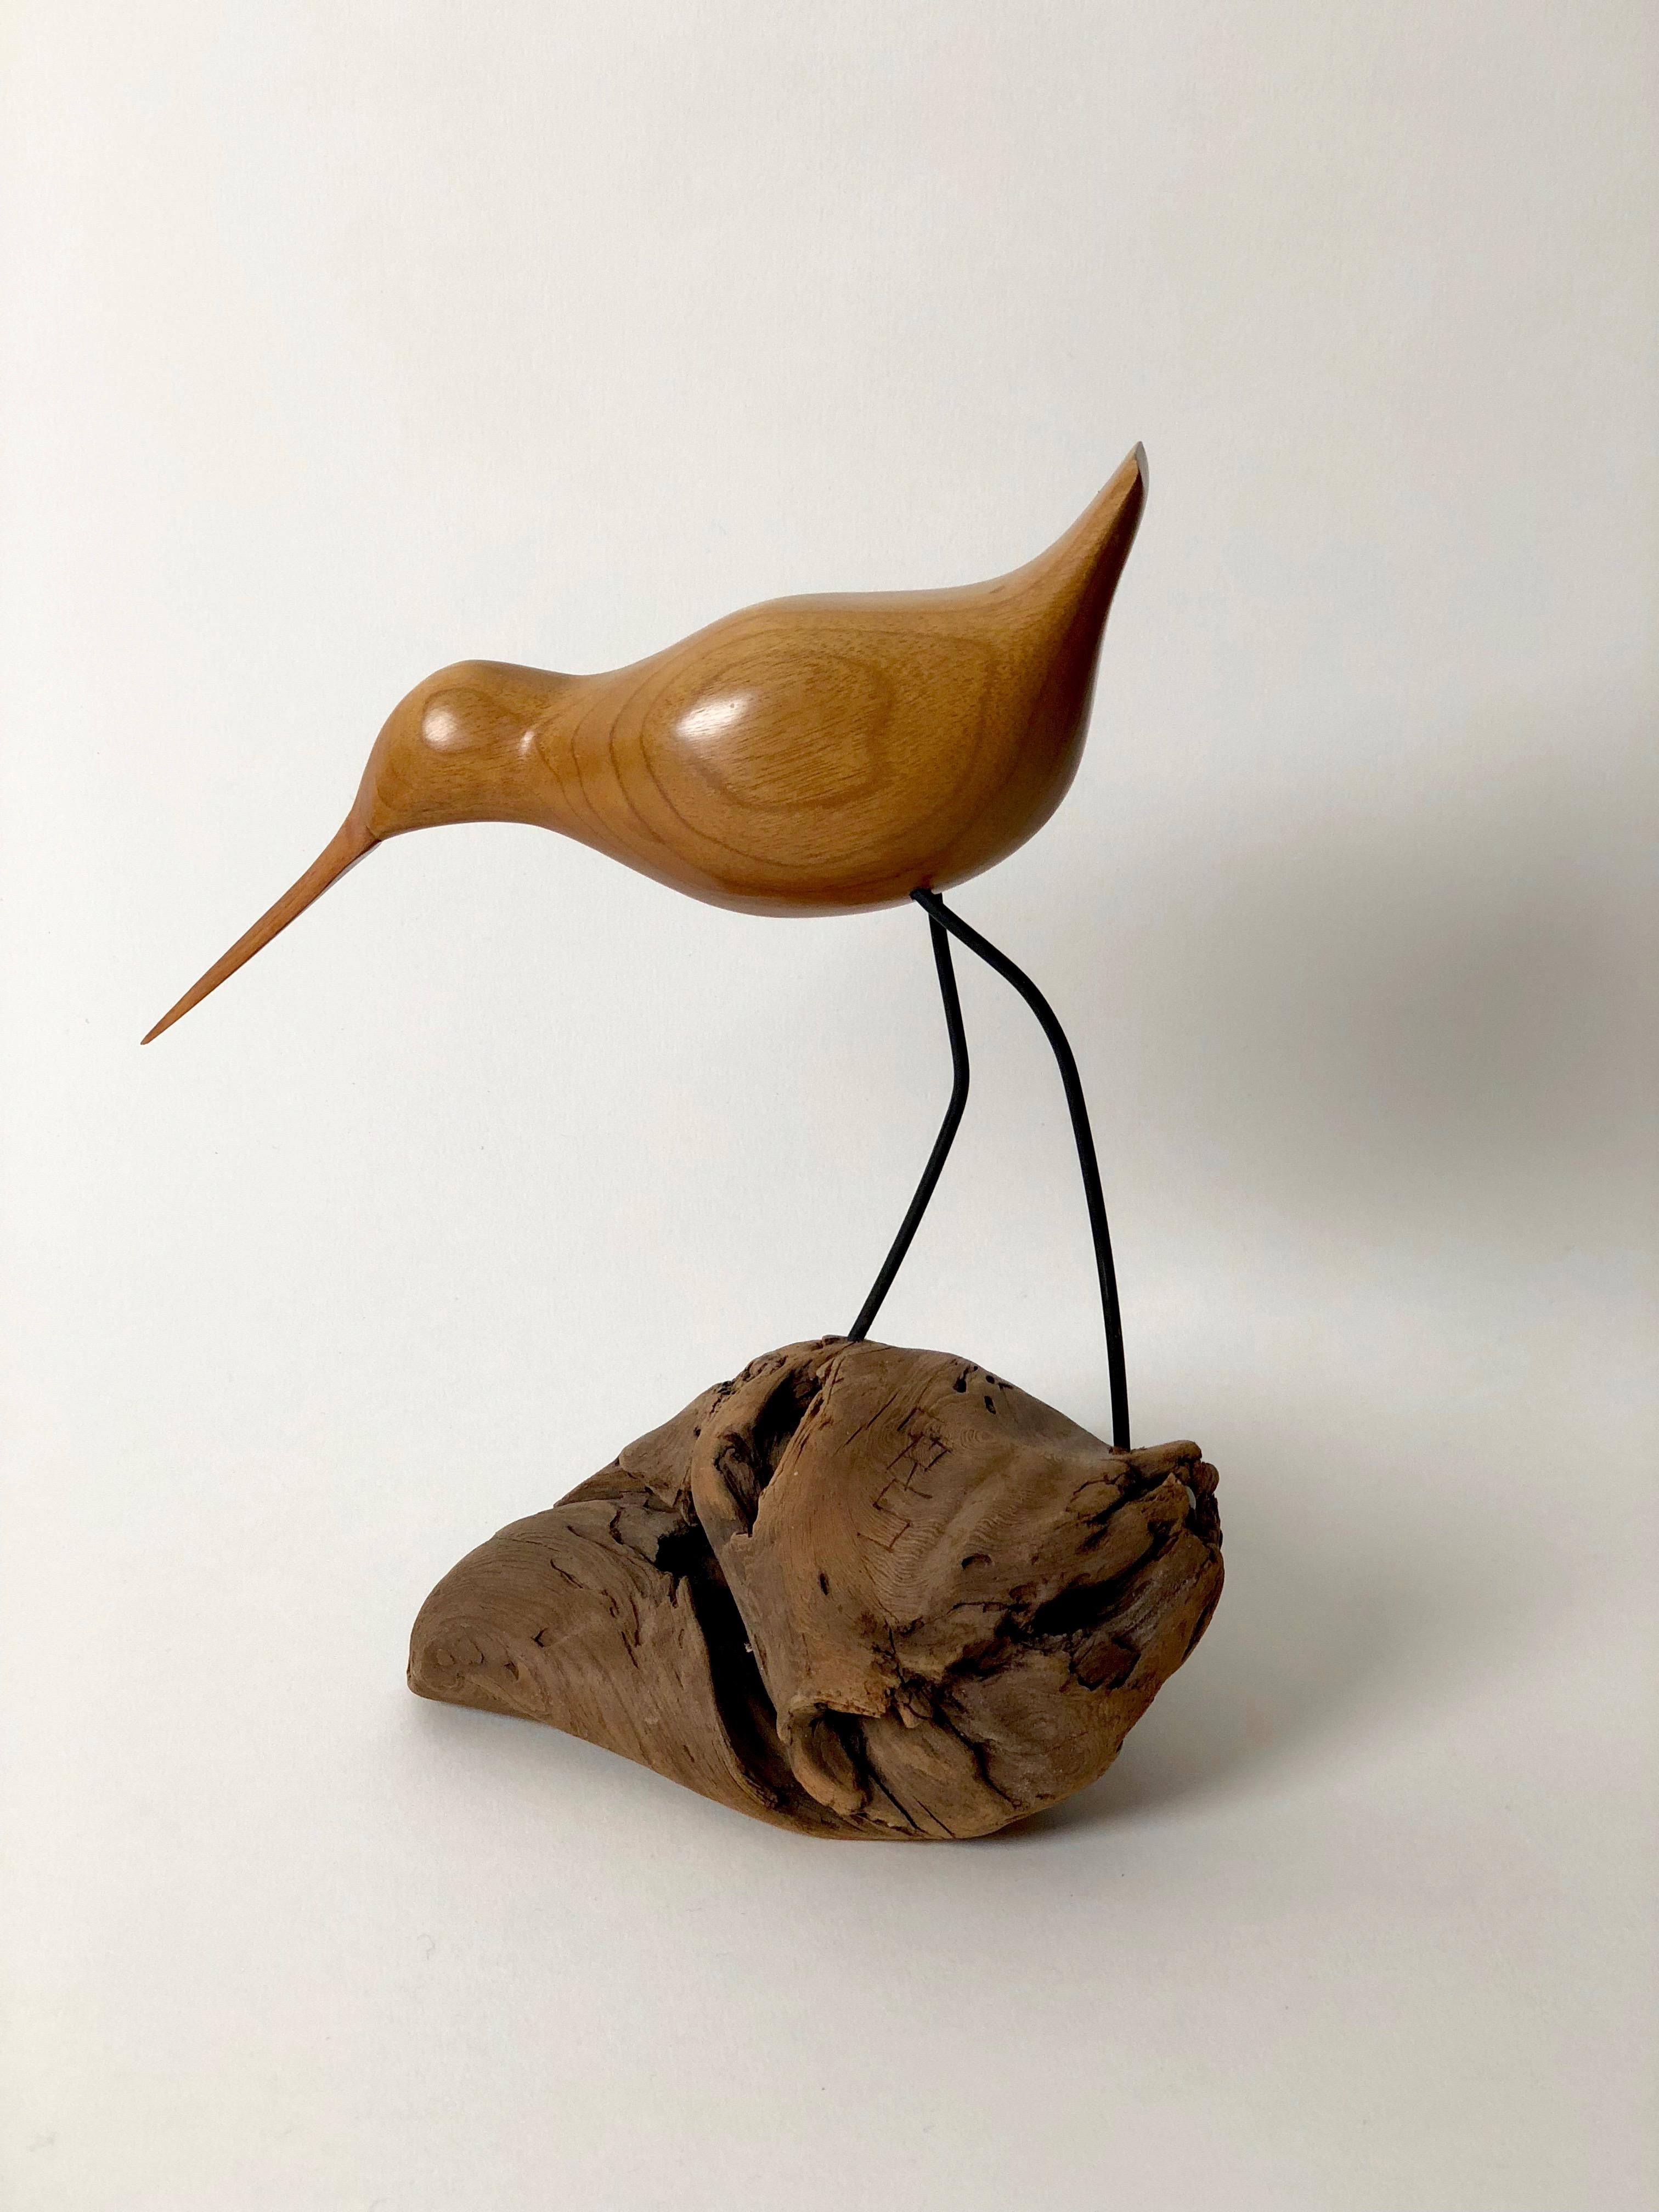 This hand carved sculpture, of a bird, was made by an unknown Artist in the 1950s. The articulation of the form comes from careful observation 
resulting in a beautifully balanced object mounted on a piece of drift wood. The work is signed with the